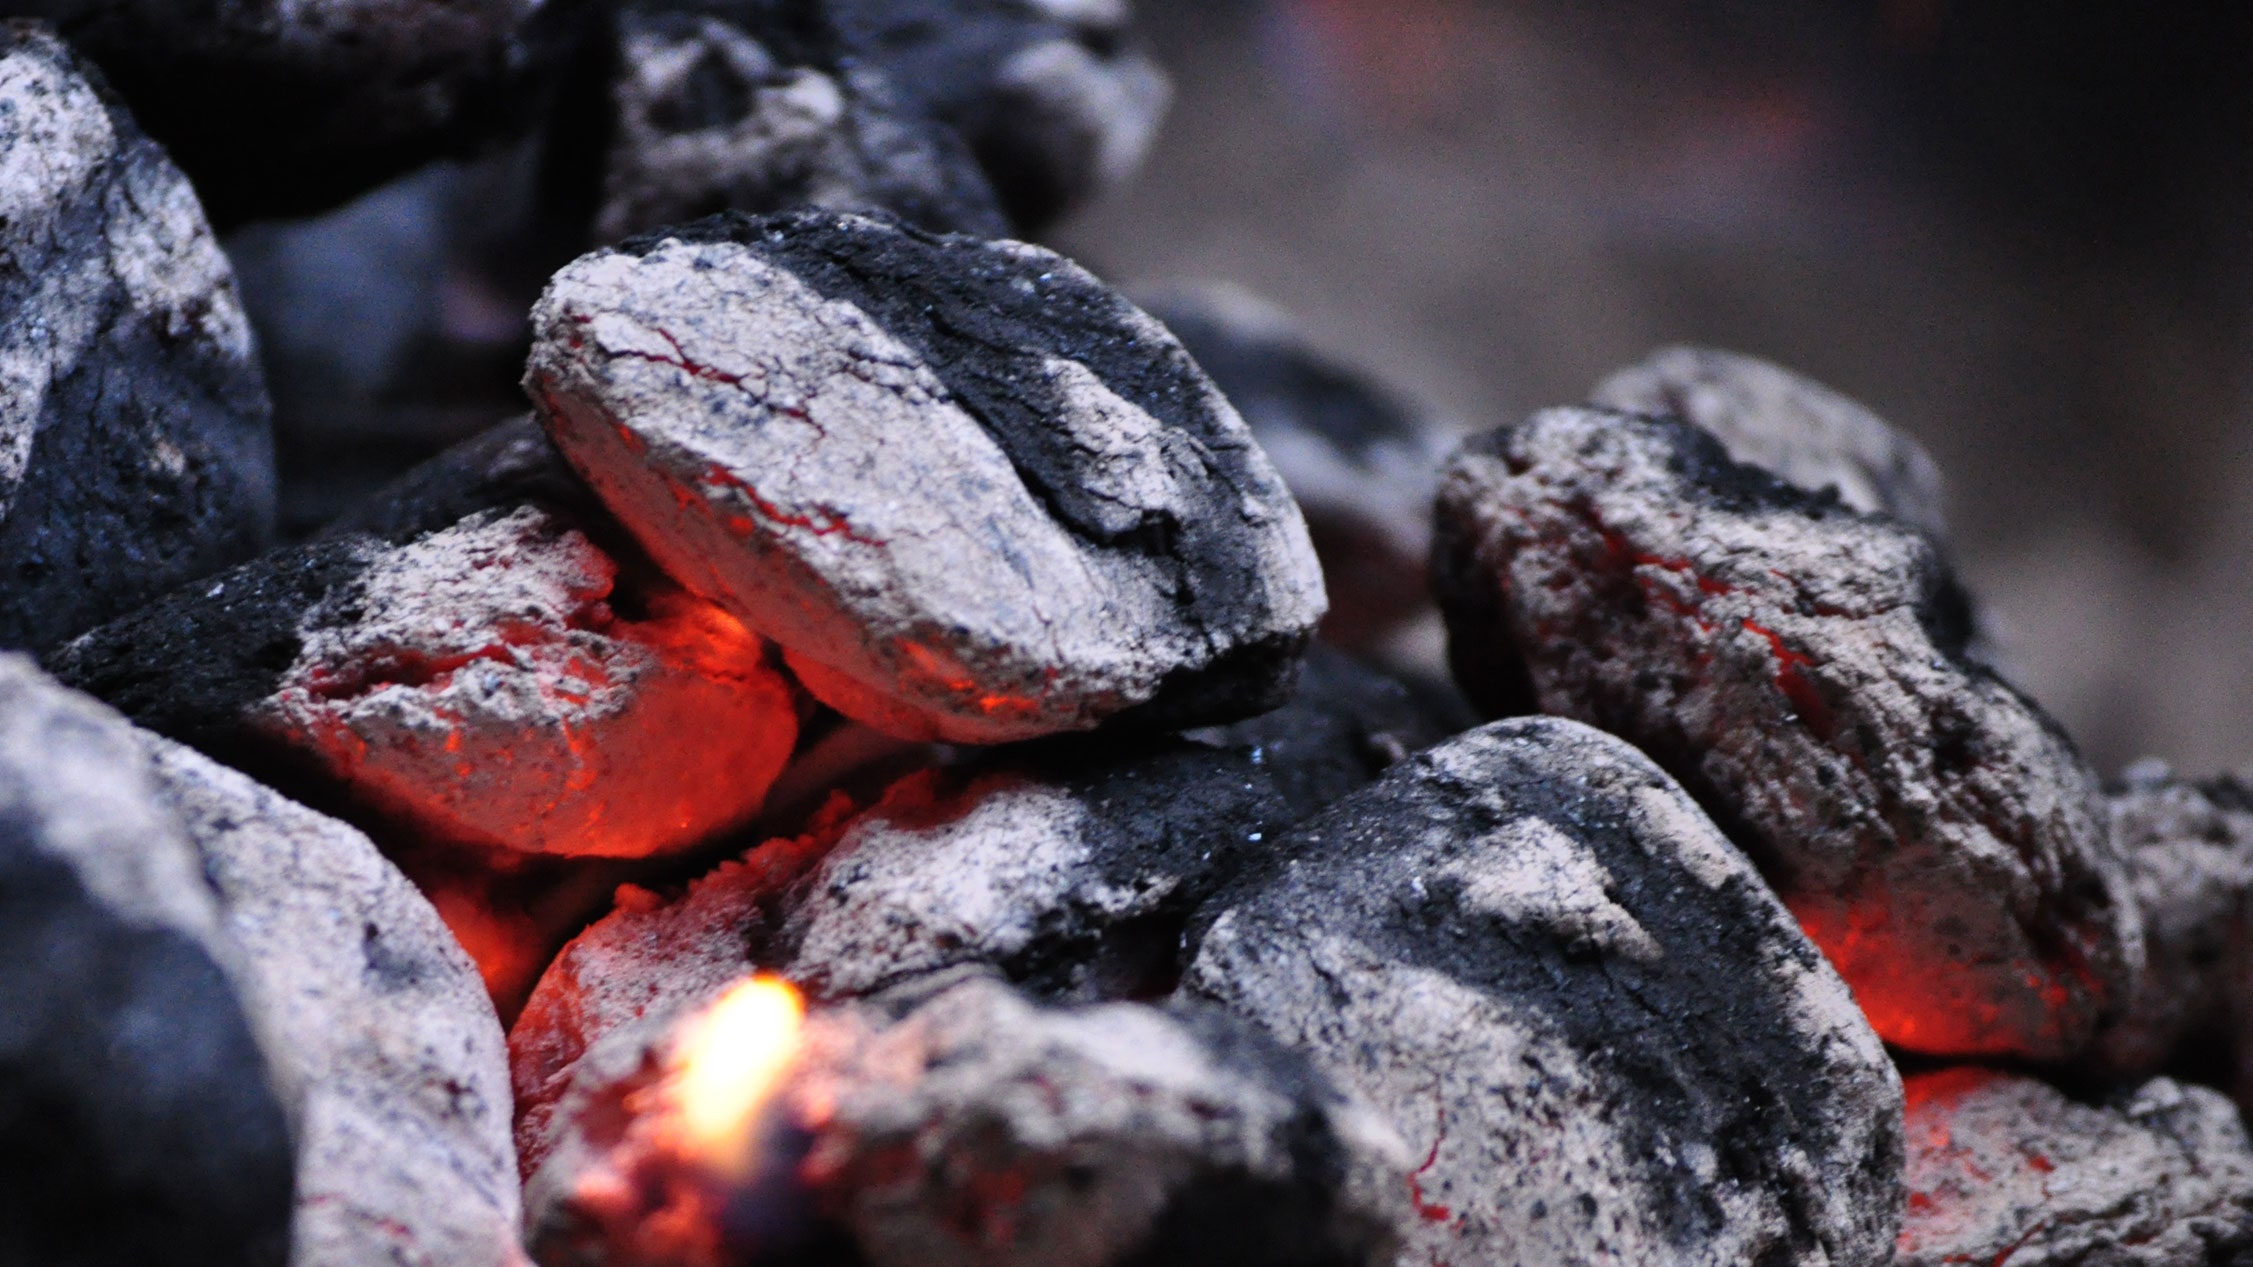 How to Solve the Deforestation: A Solution Using Bio-based Material for BBQ Briquettes